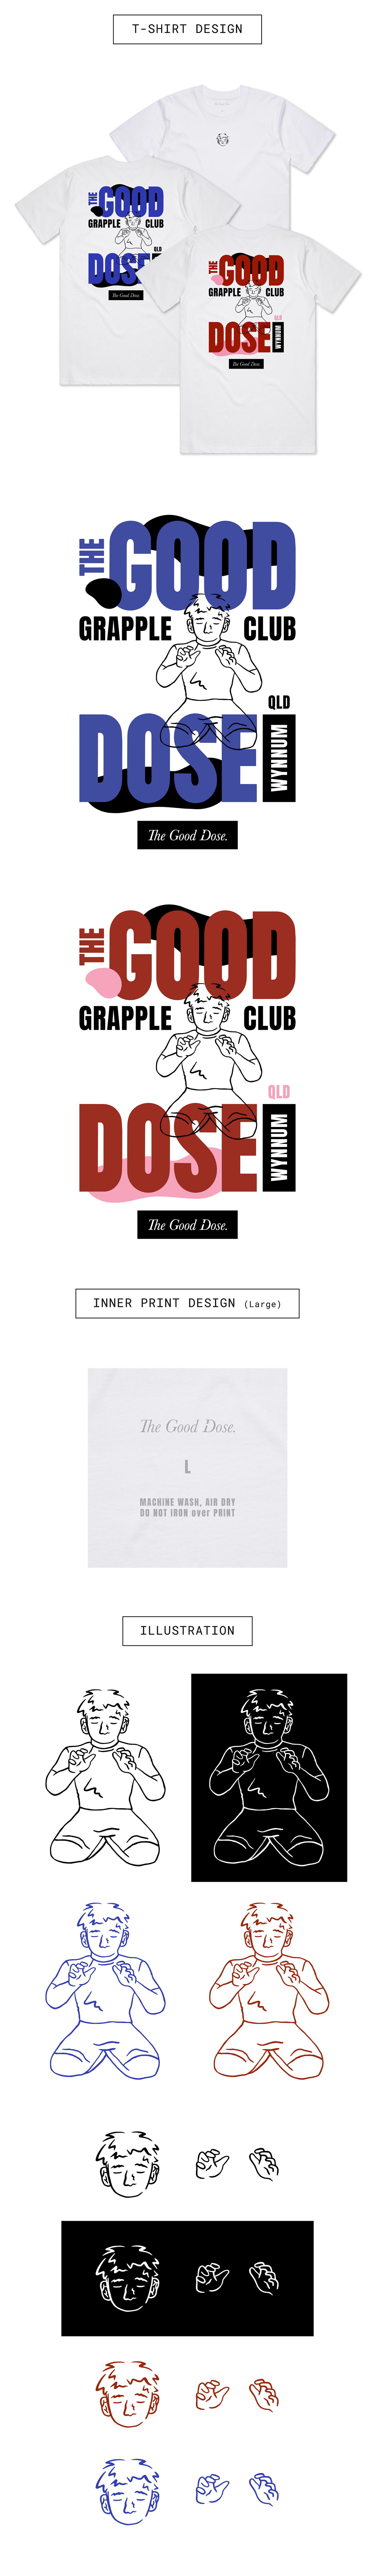 THE GOOD DOSE